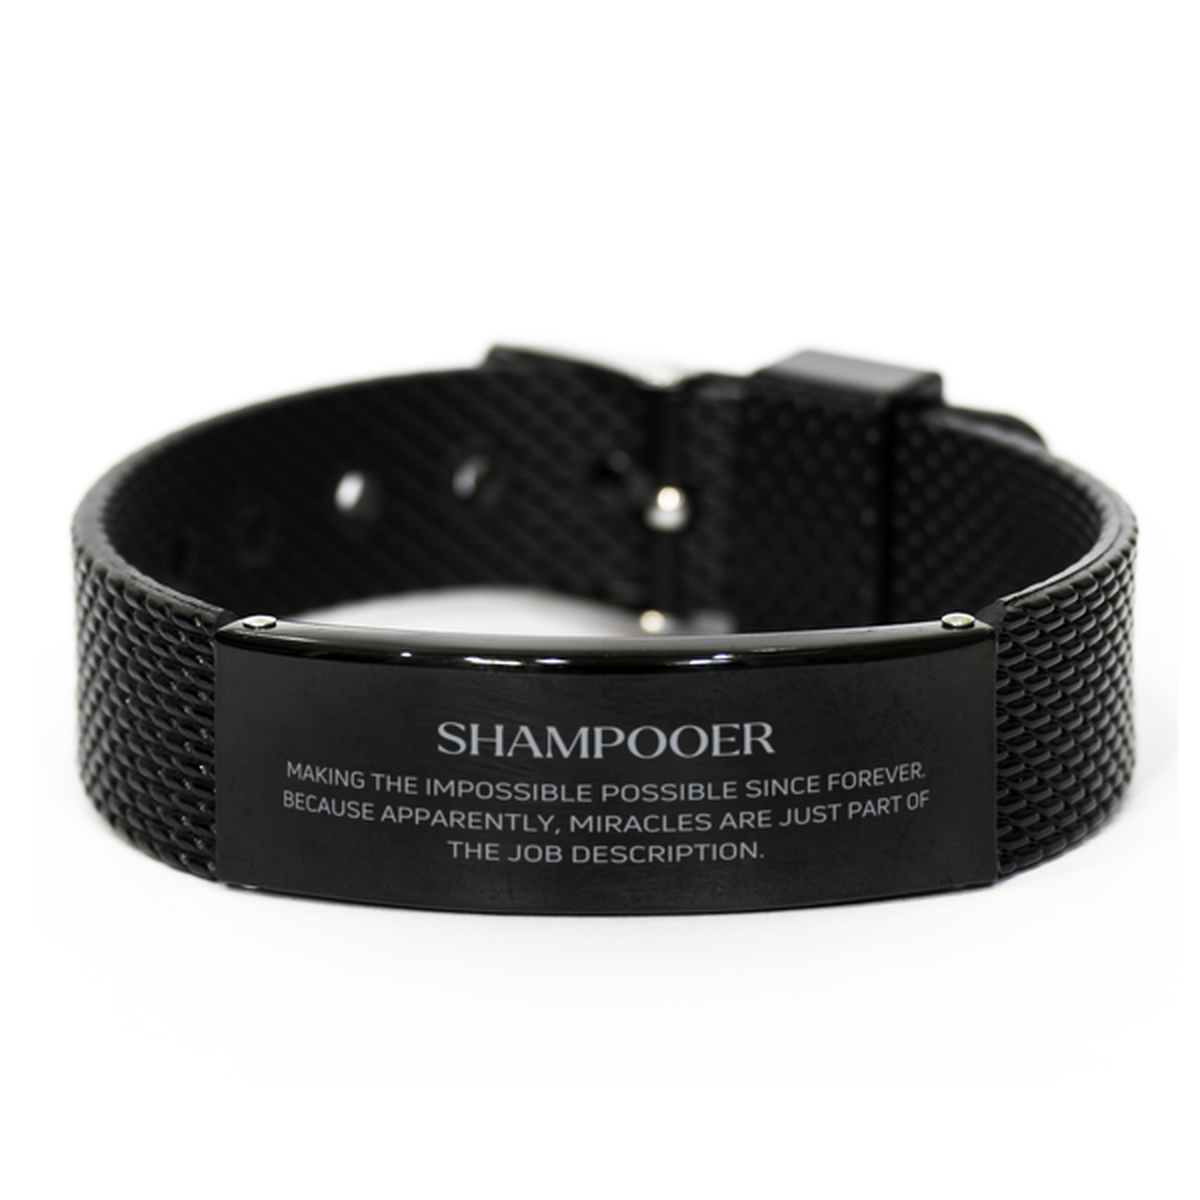 Funny Shampooer Gifts, Miracles are just part of the job description, Inspirational Birthday Black Shark Mesh Bracelet For Shampooer, Men, Women, Coworkers, Friends, Boss